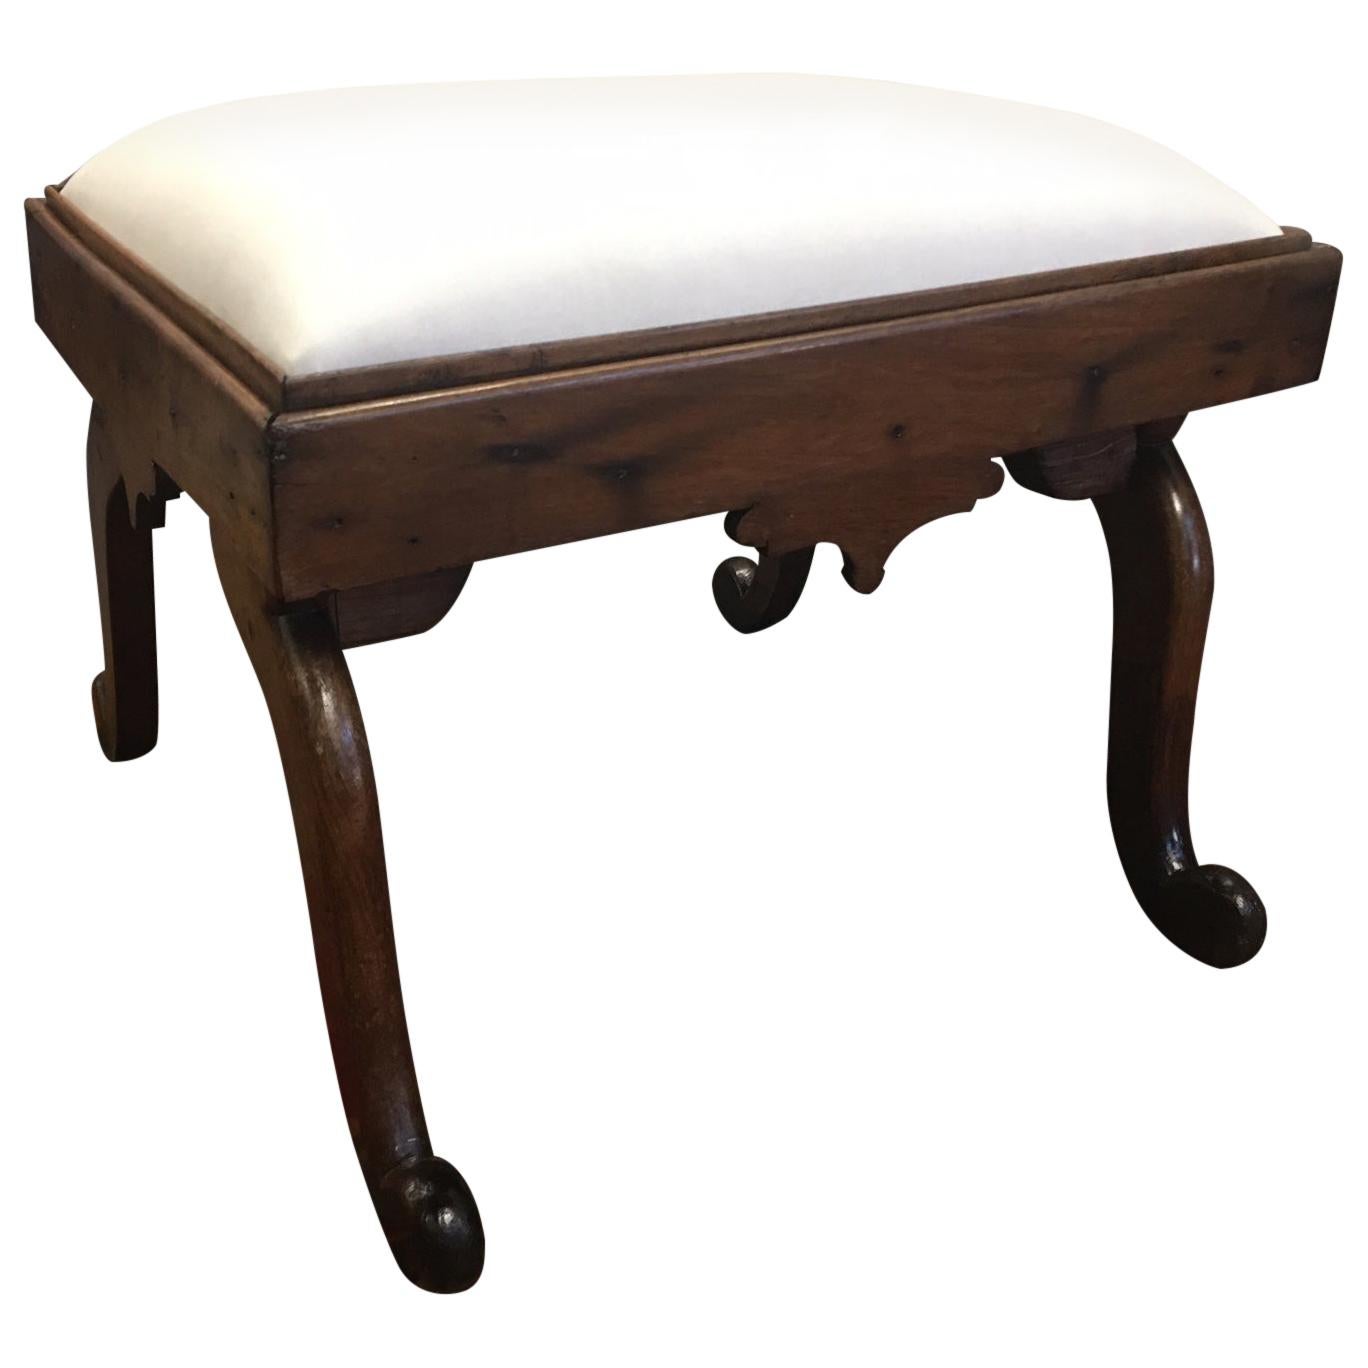 American Mahogany Stool or Bench with Decorative Carved Design, 19th Century